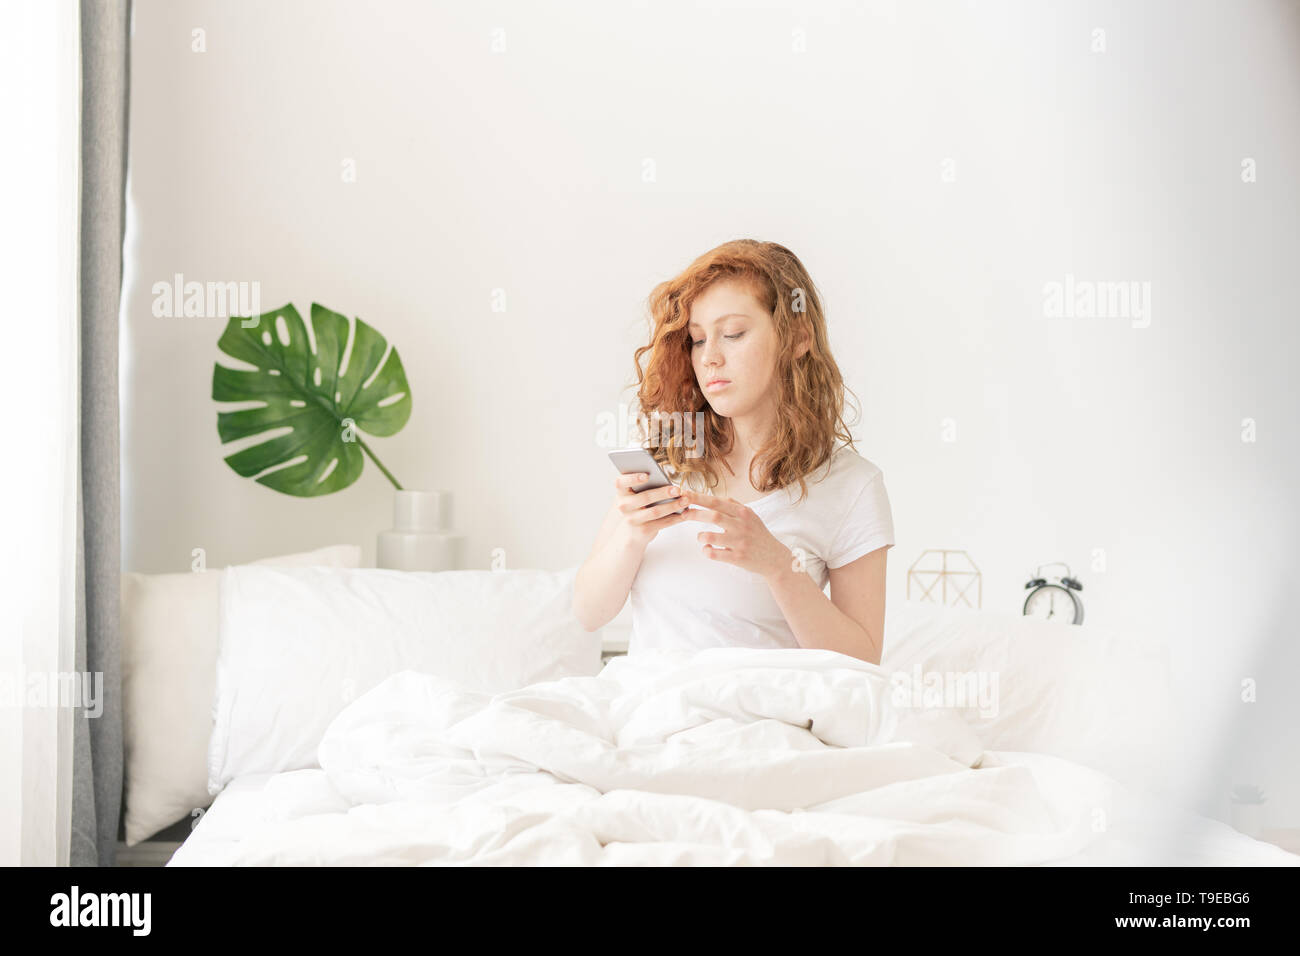 Texting in bed Stock Photo